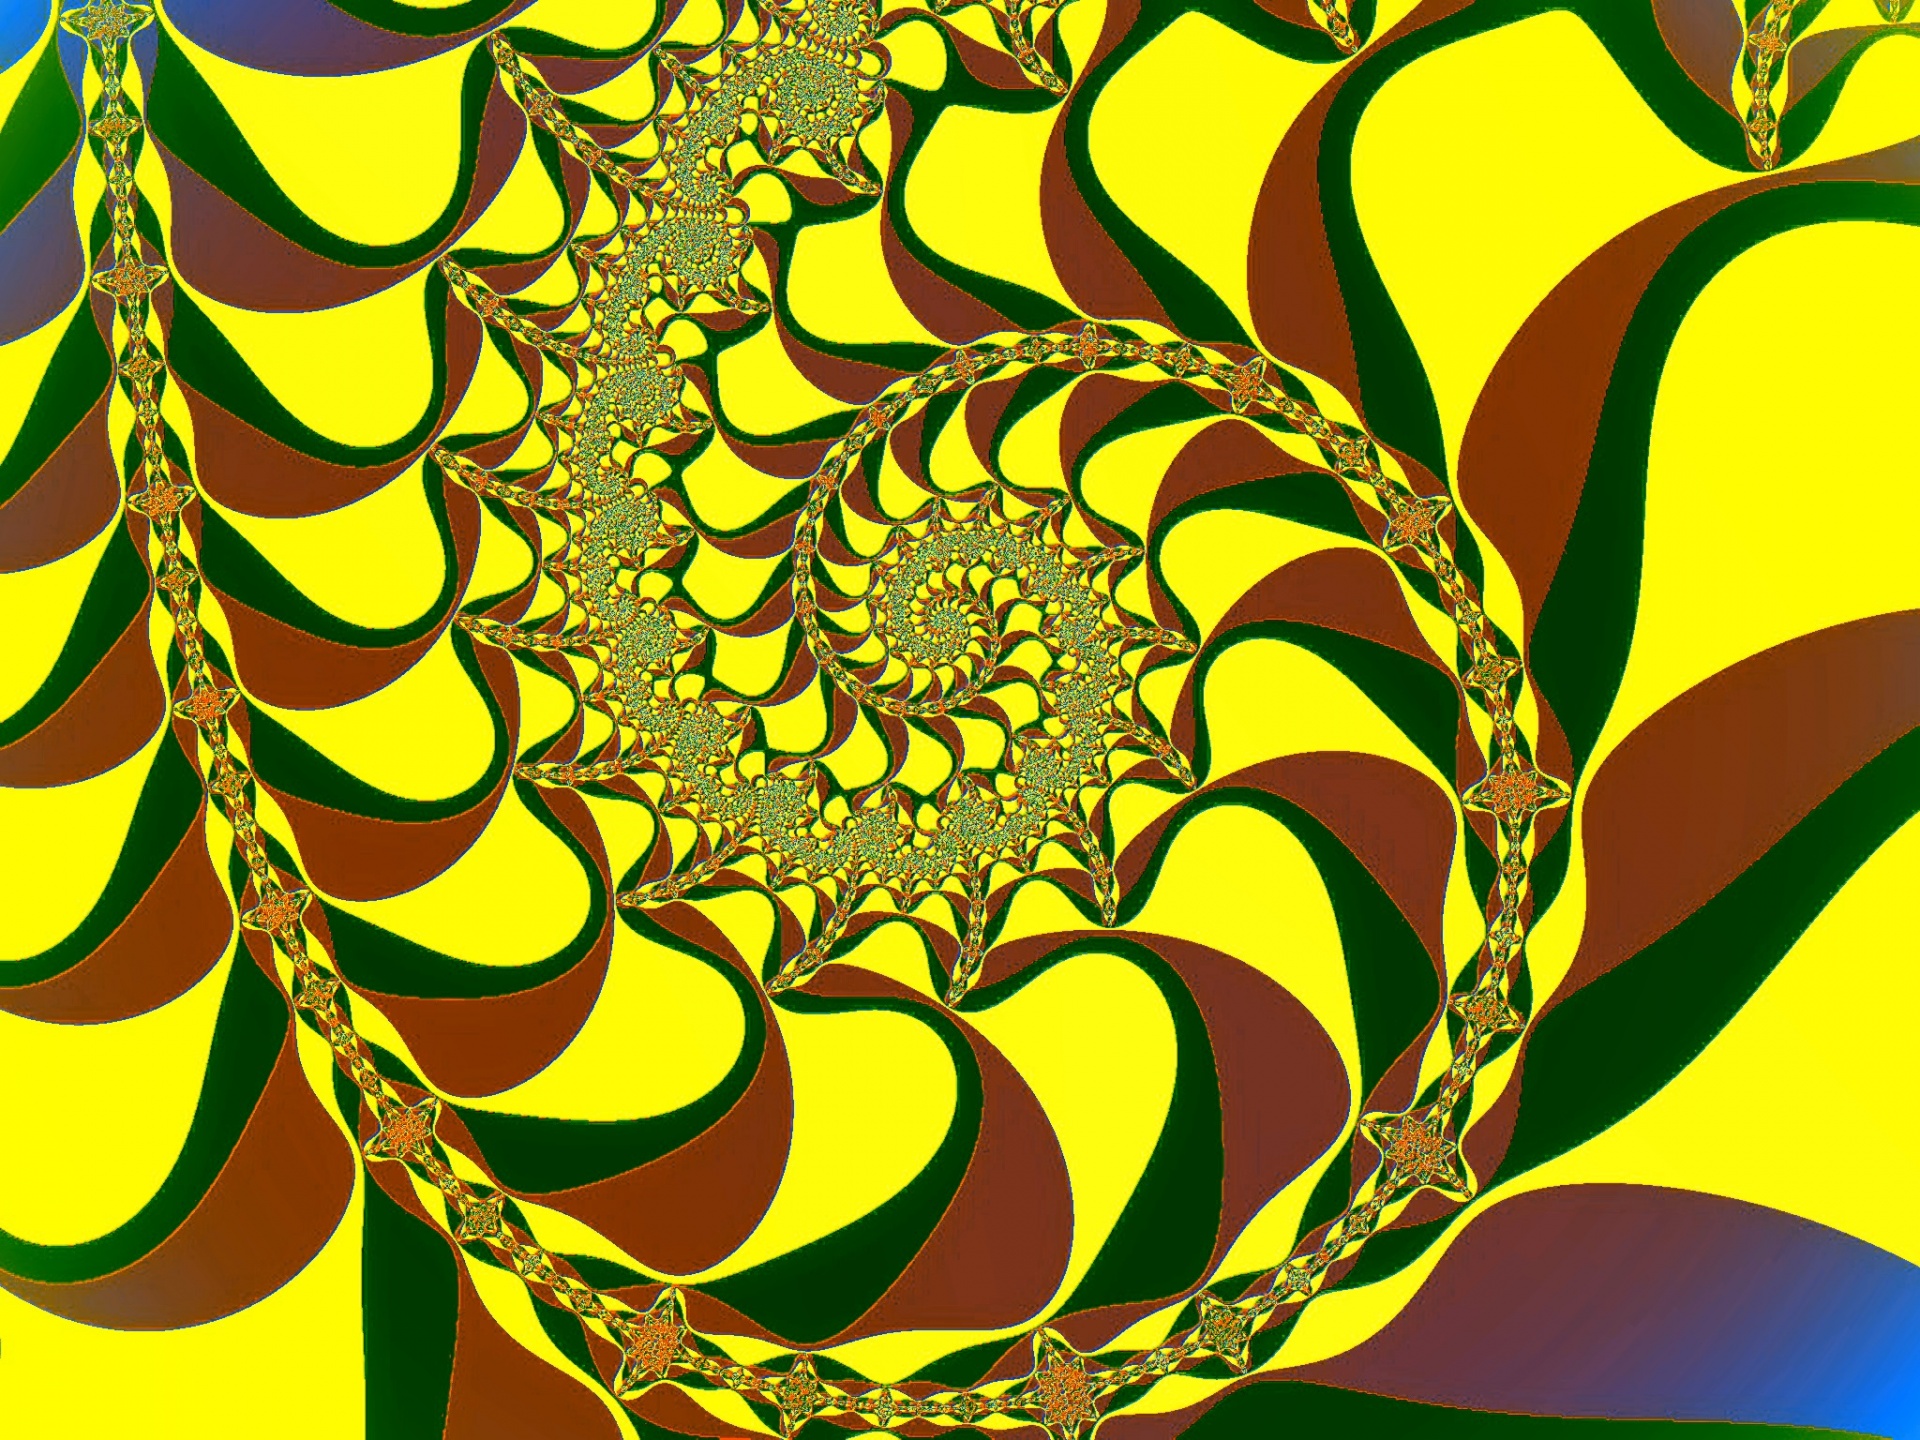 Fractal Spiral In A Bright Colors